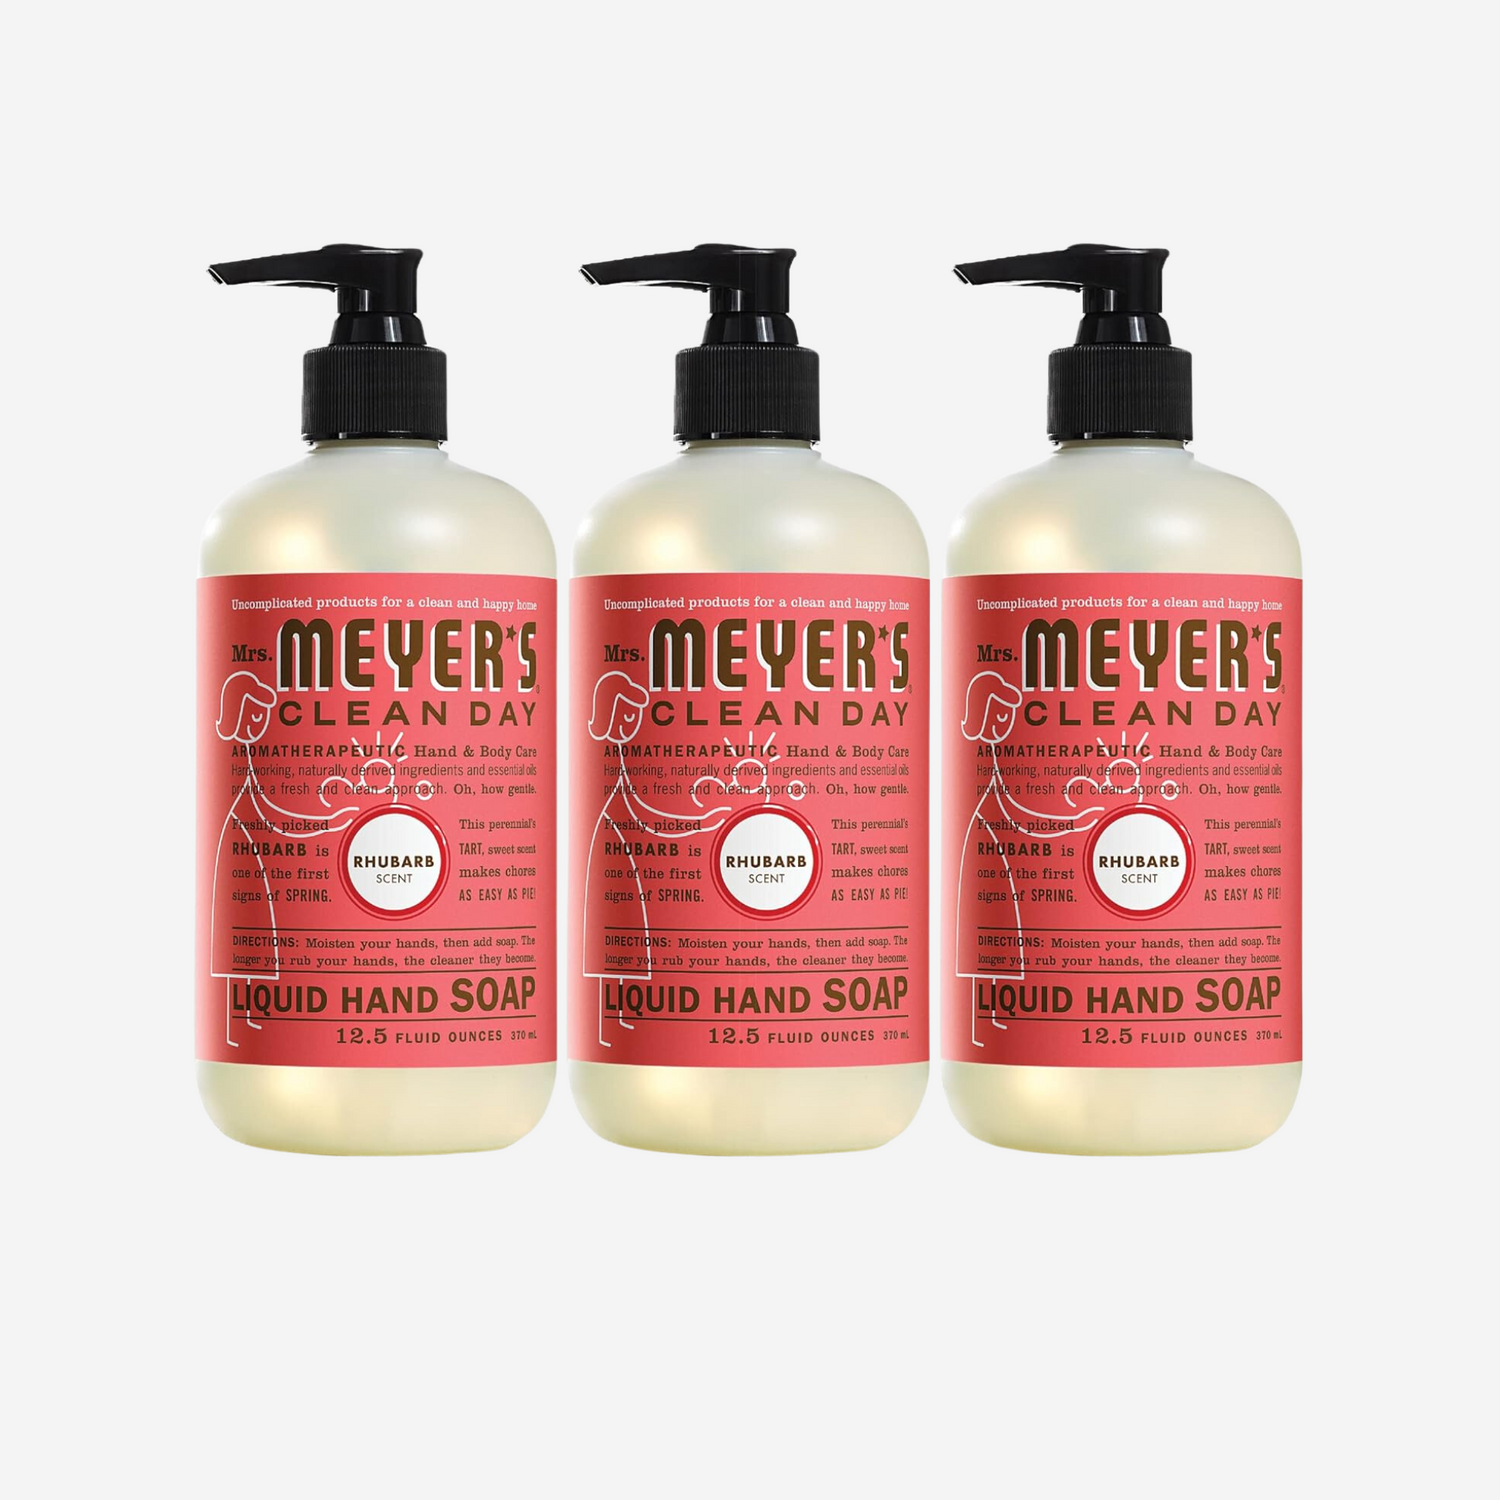 MRS. MEYER'S CLEAN DAY Hand Soap, Made with Essential Oils, Biodegradable Formula, Rhubarb, 12.5 Fl. Oz